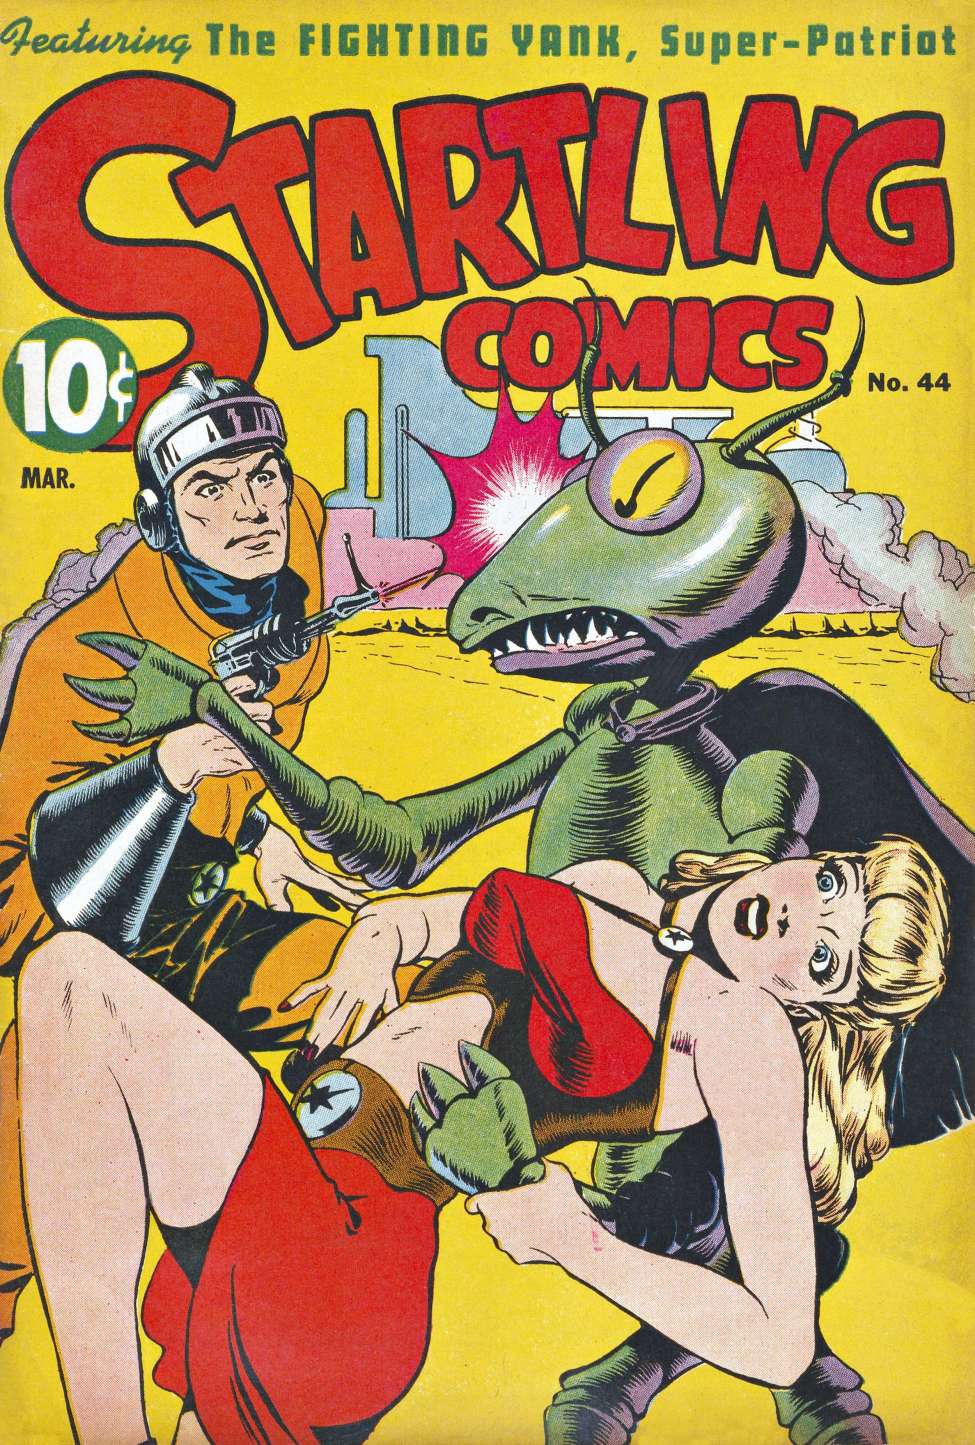 Book Cover For Startling Comics 44 - Version 2